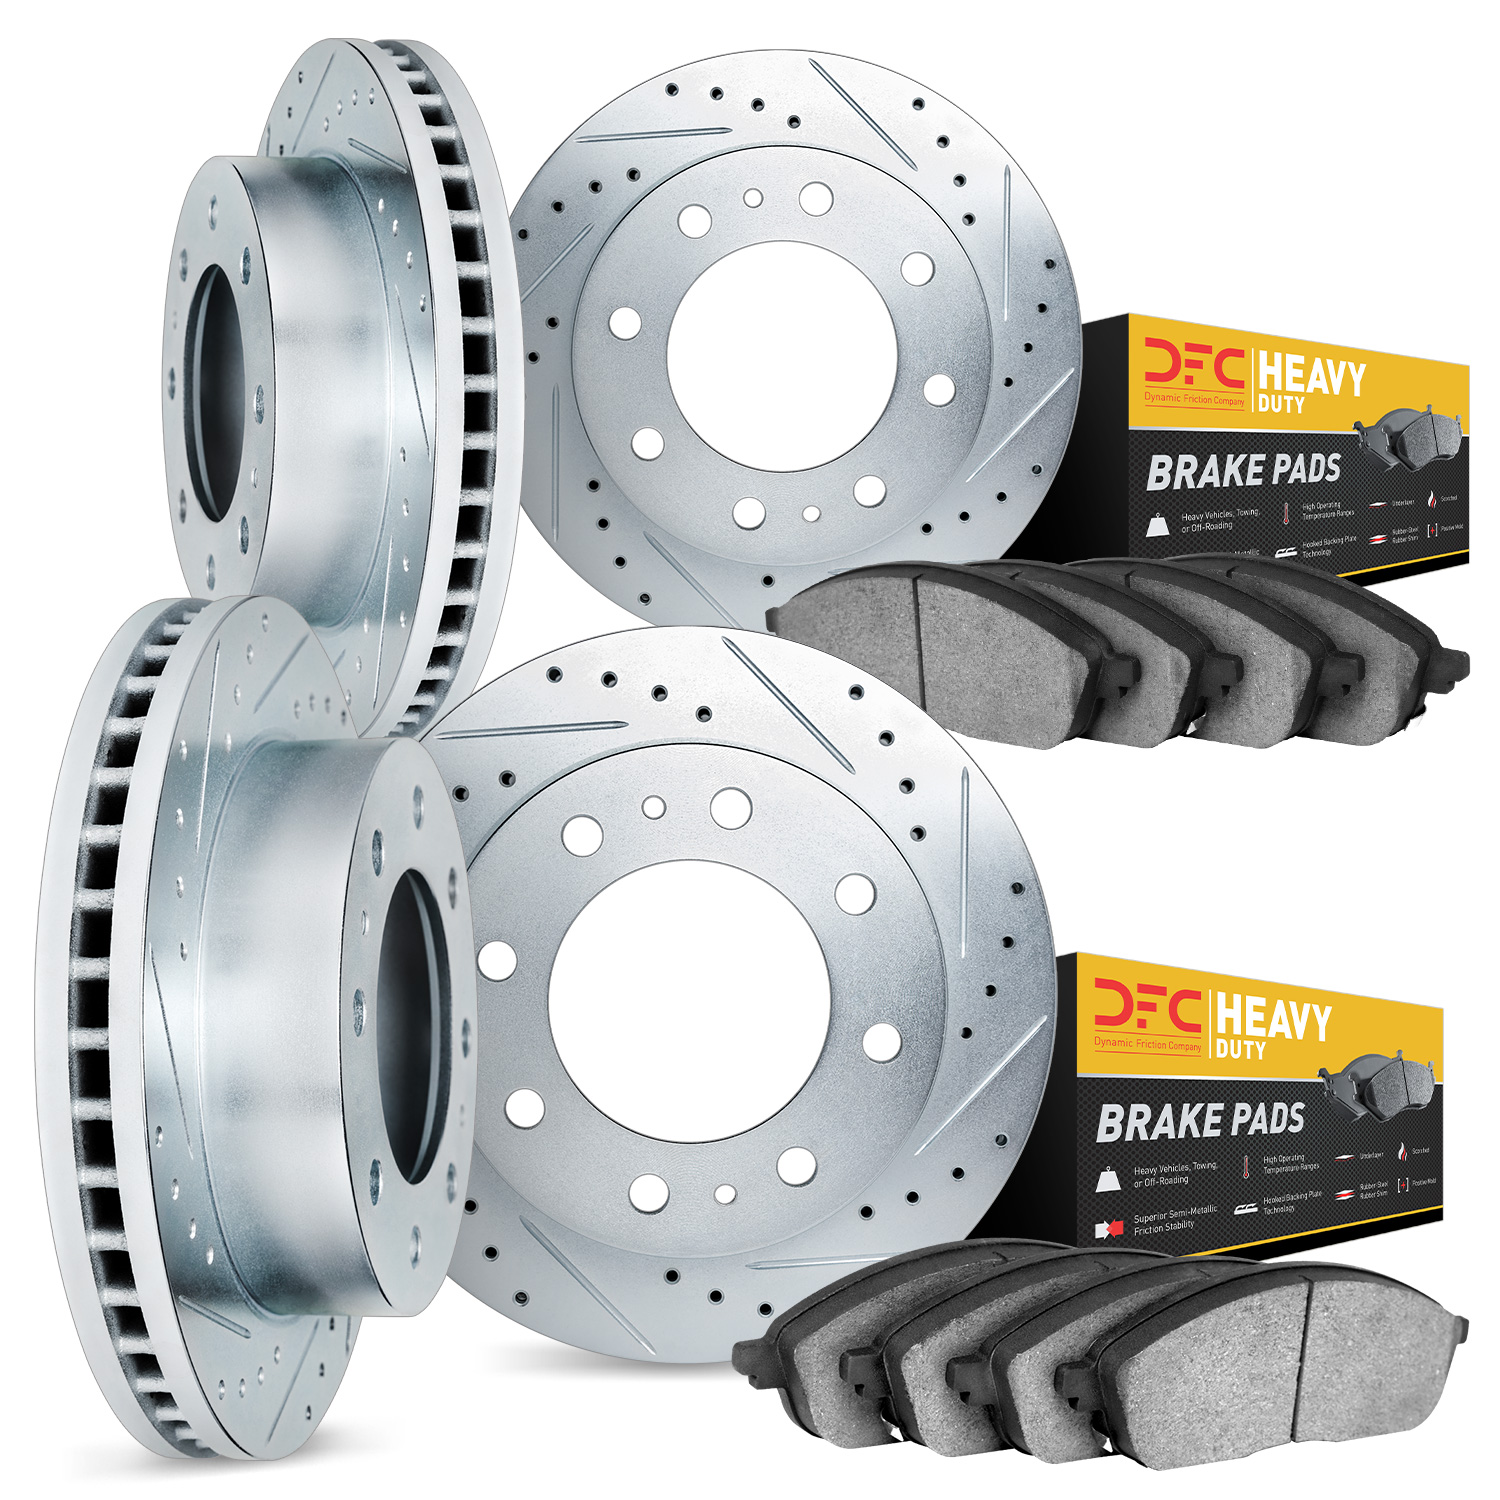 7204-99105 Drilled/Slotted Rotors w/Heavy-Duty Brake Pads Kit [Silver], Fits Select Ford/Lincoln/Mercury/Mazda, Position: Front